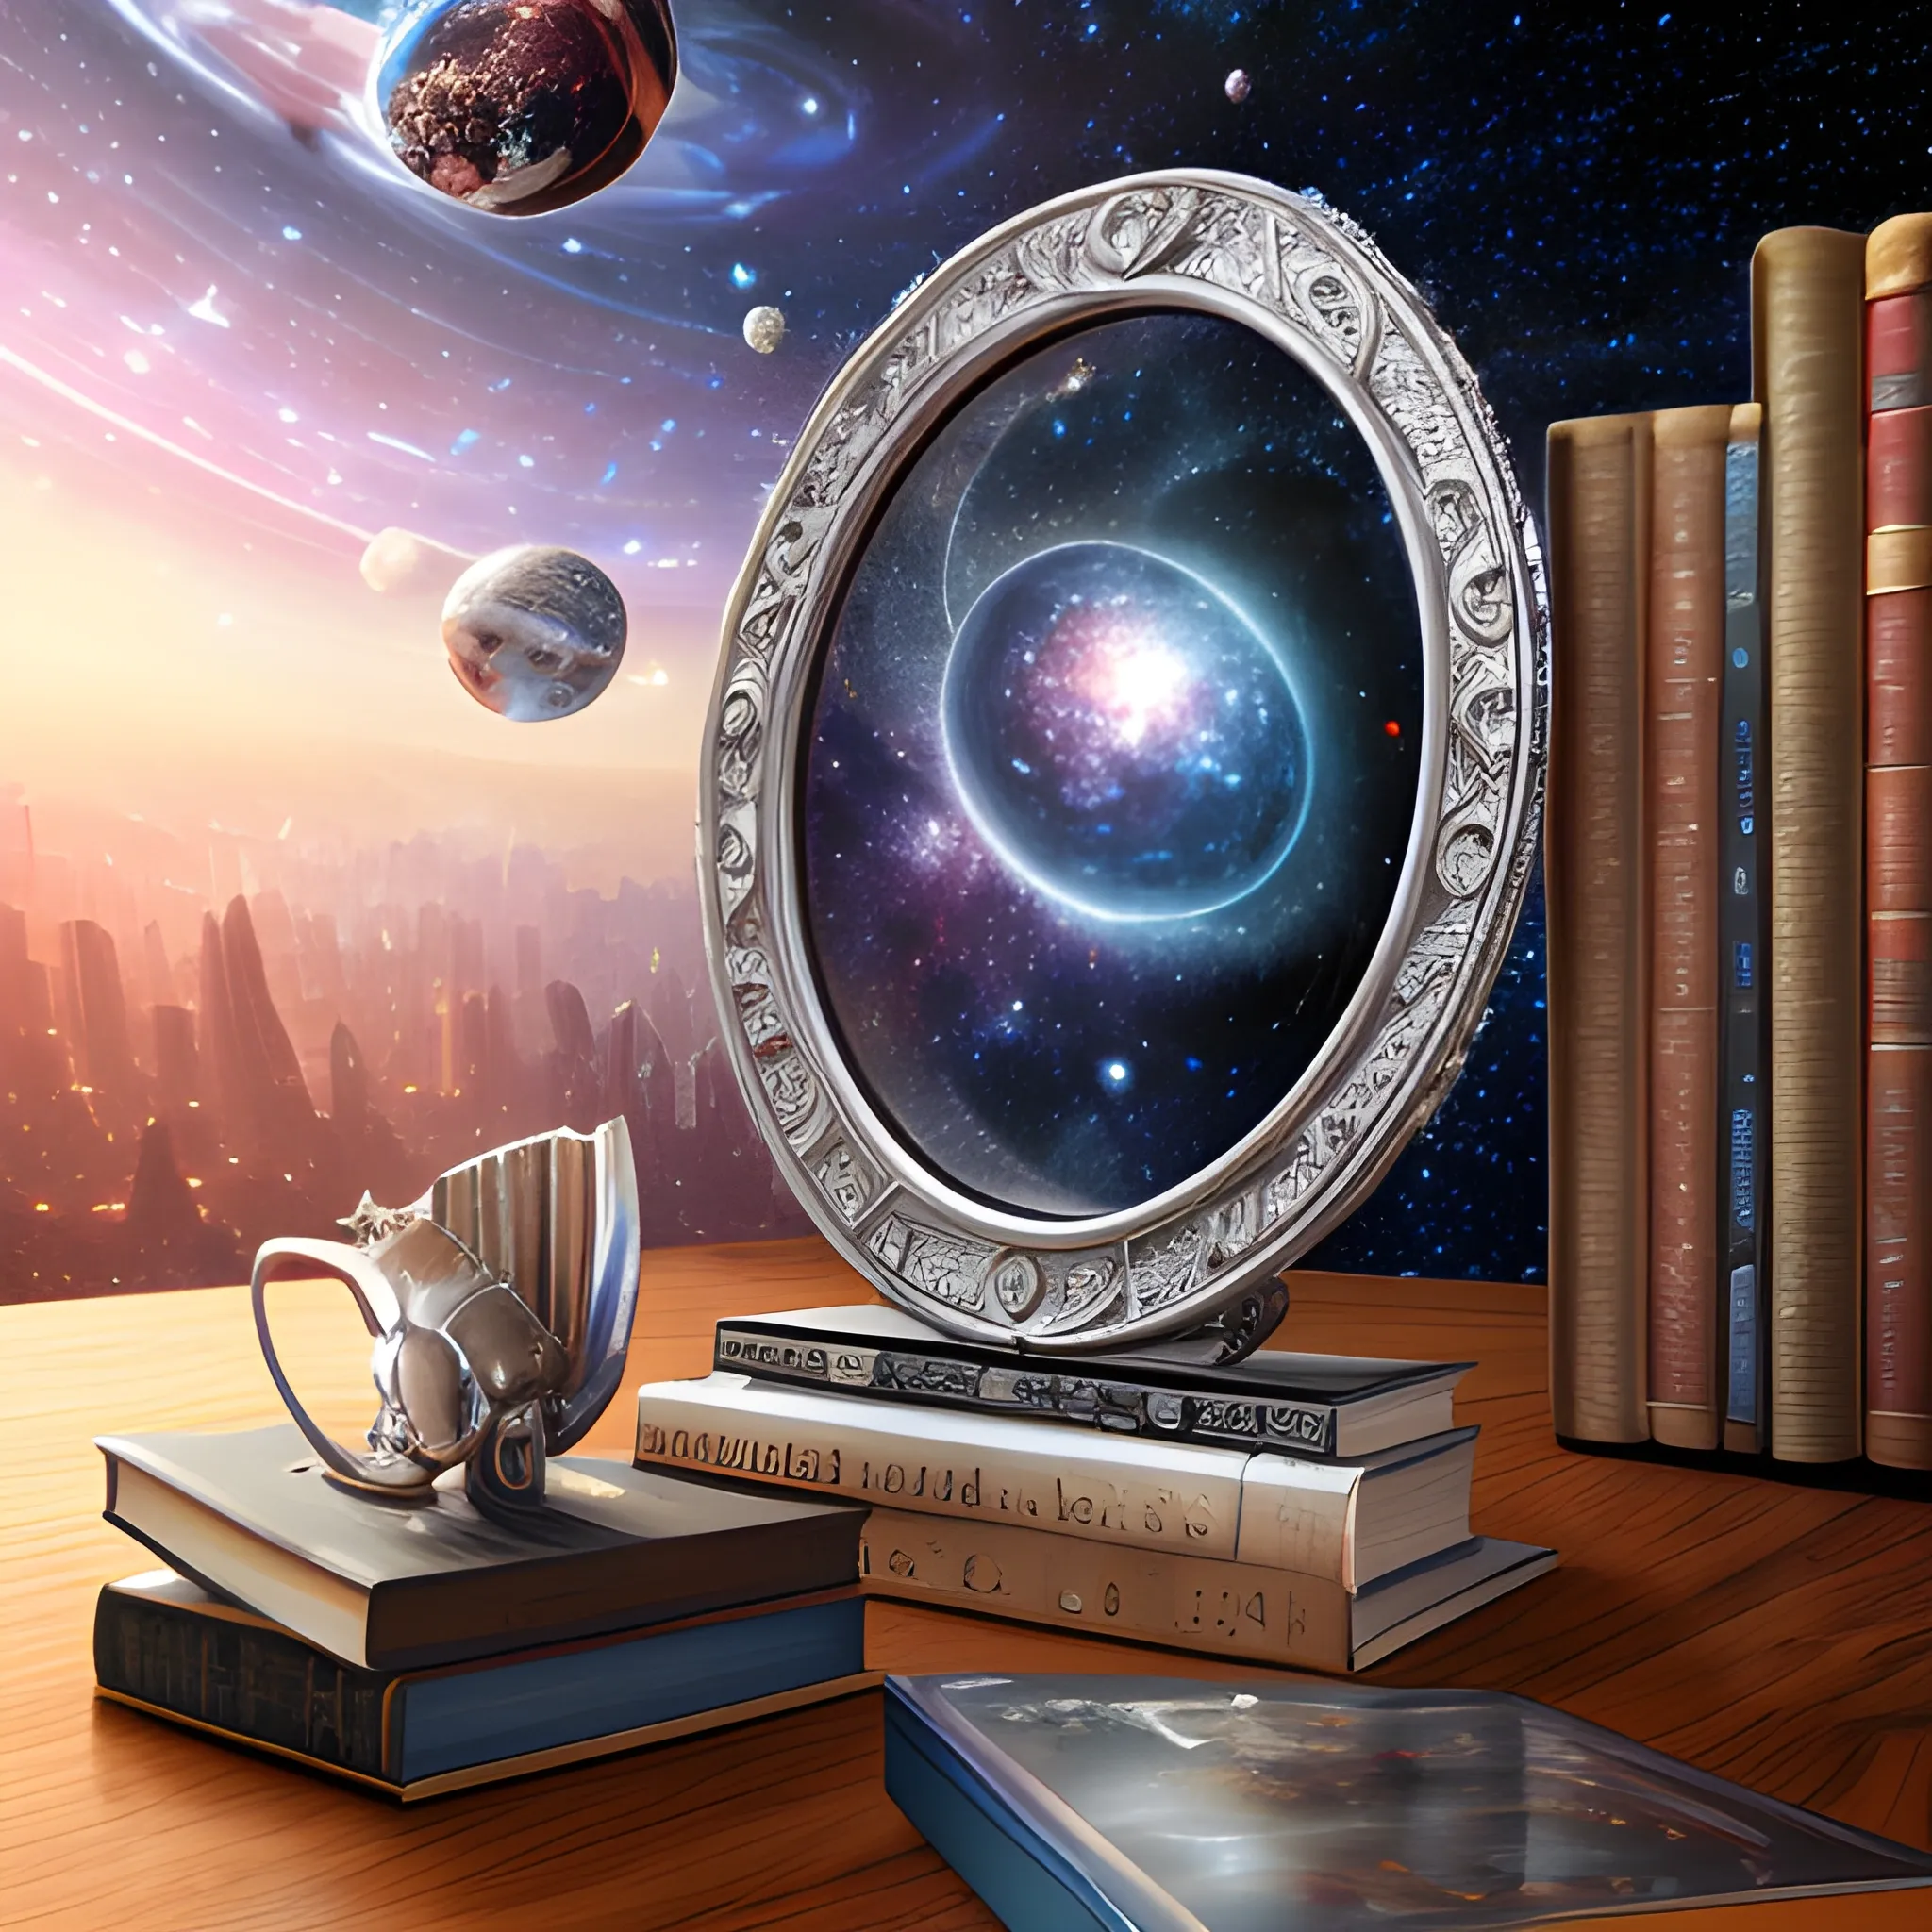 (((high detail))), best quality, (detailed), (high resolution) silver universe, books, books on a table, shelf with some books, studio ghiblin, anime, galaxy in the sky,
, Trippy, backround
